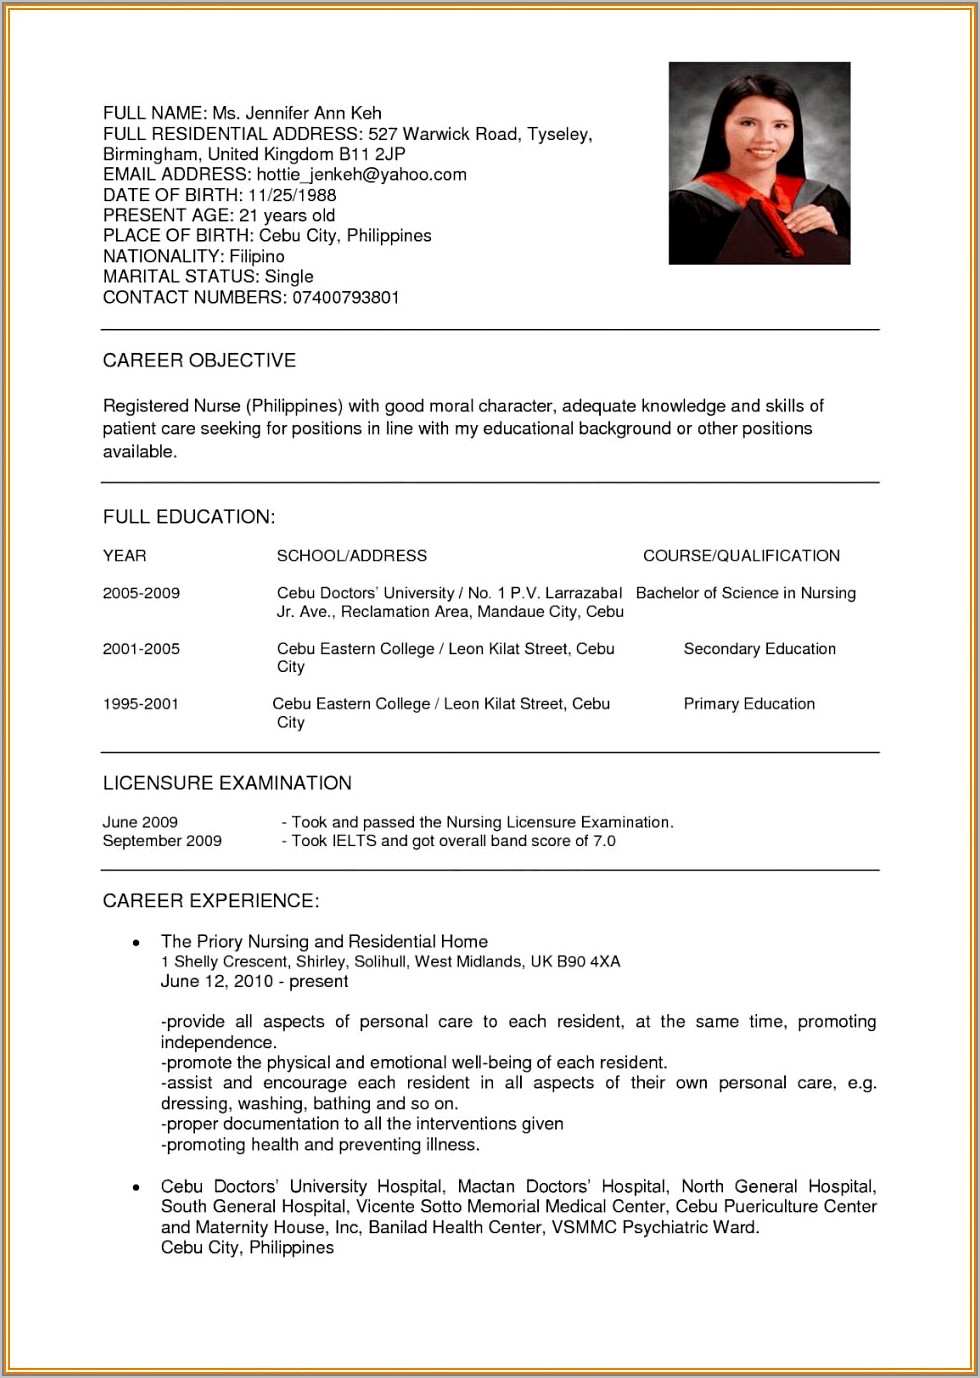 Sample Resume For Nurses In The Philippines